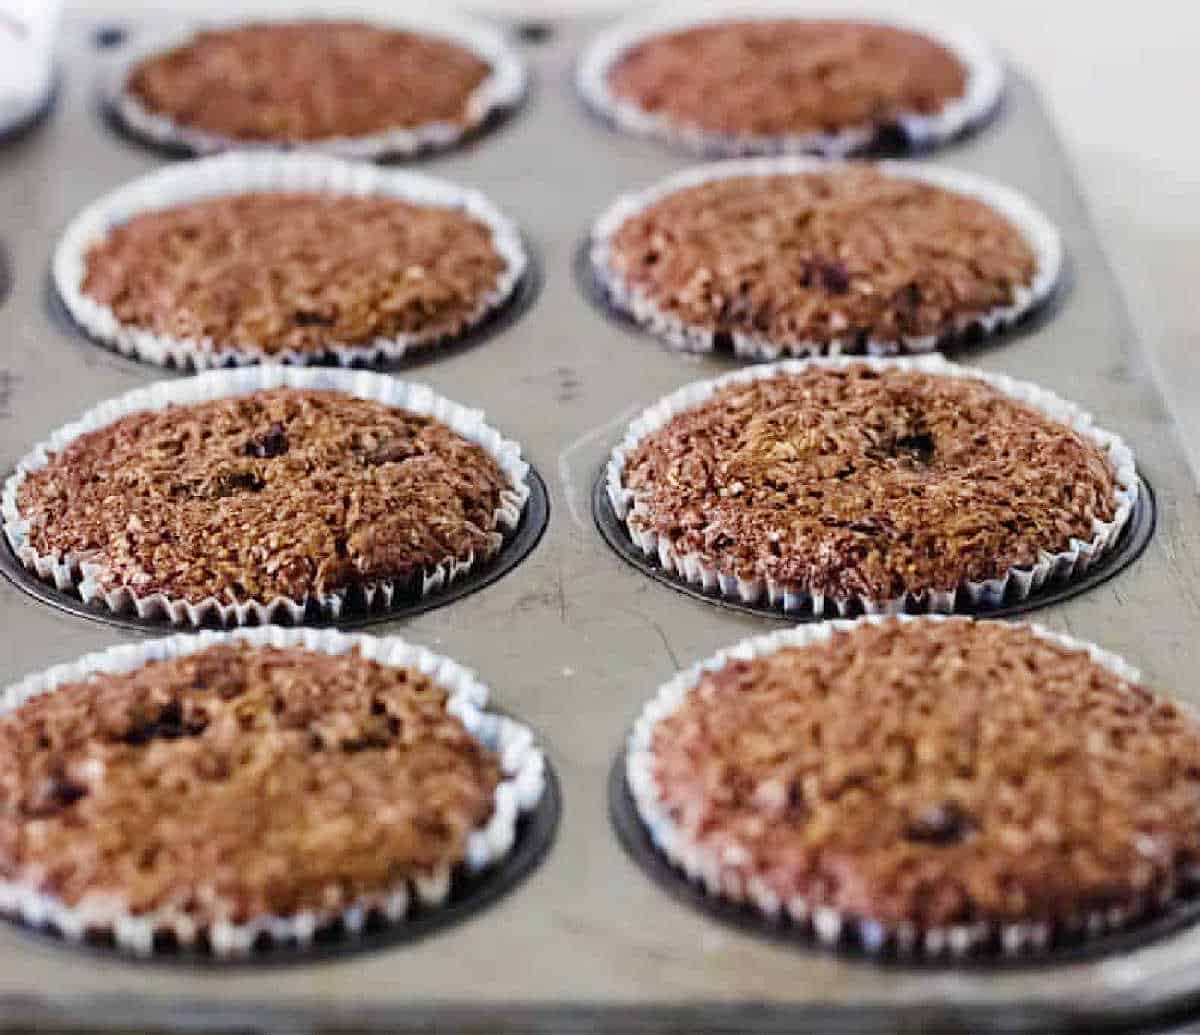 Baked bran muffins with paper liners in a metal muffin pan.